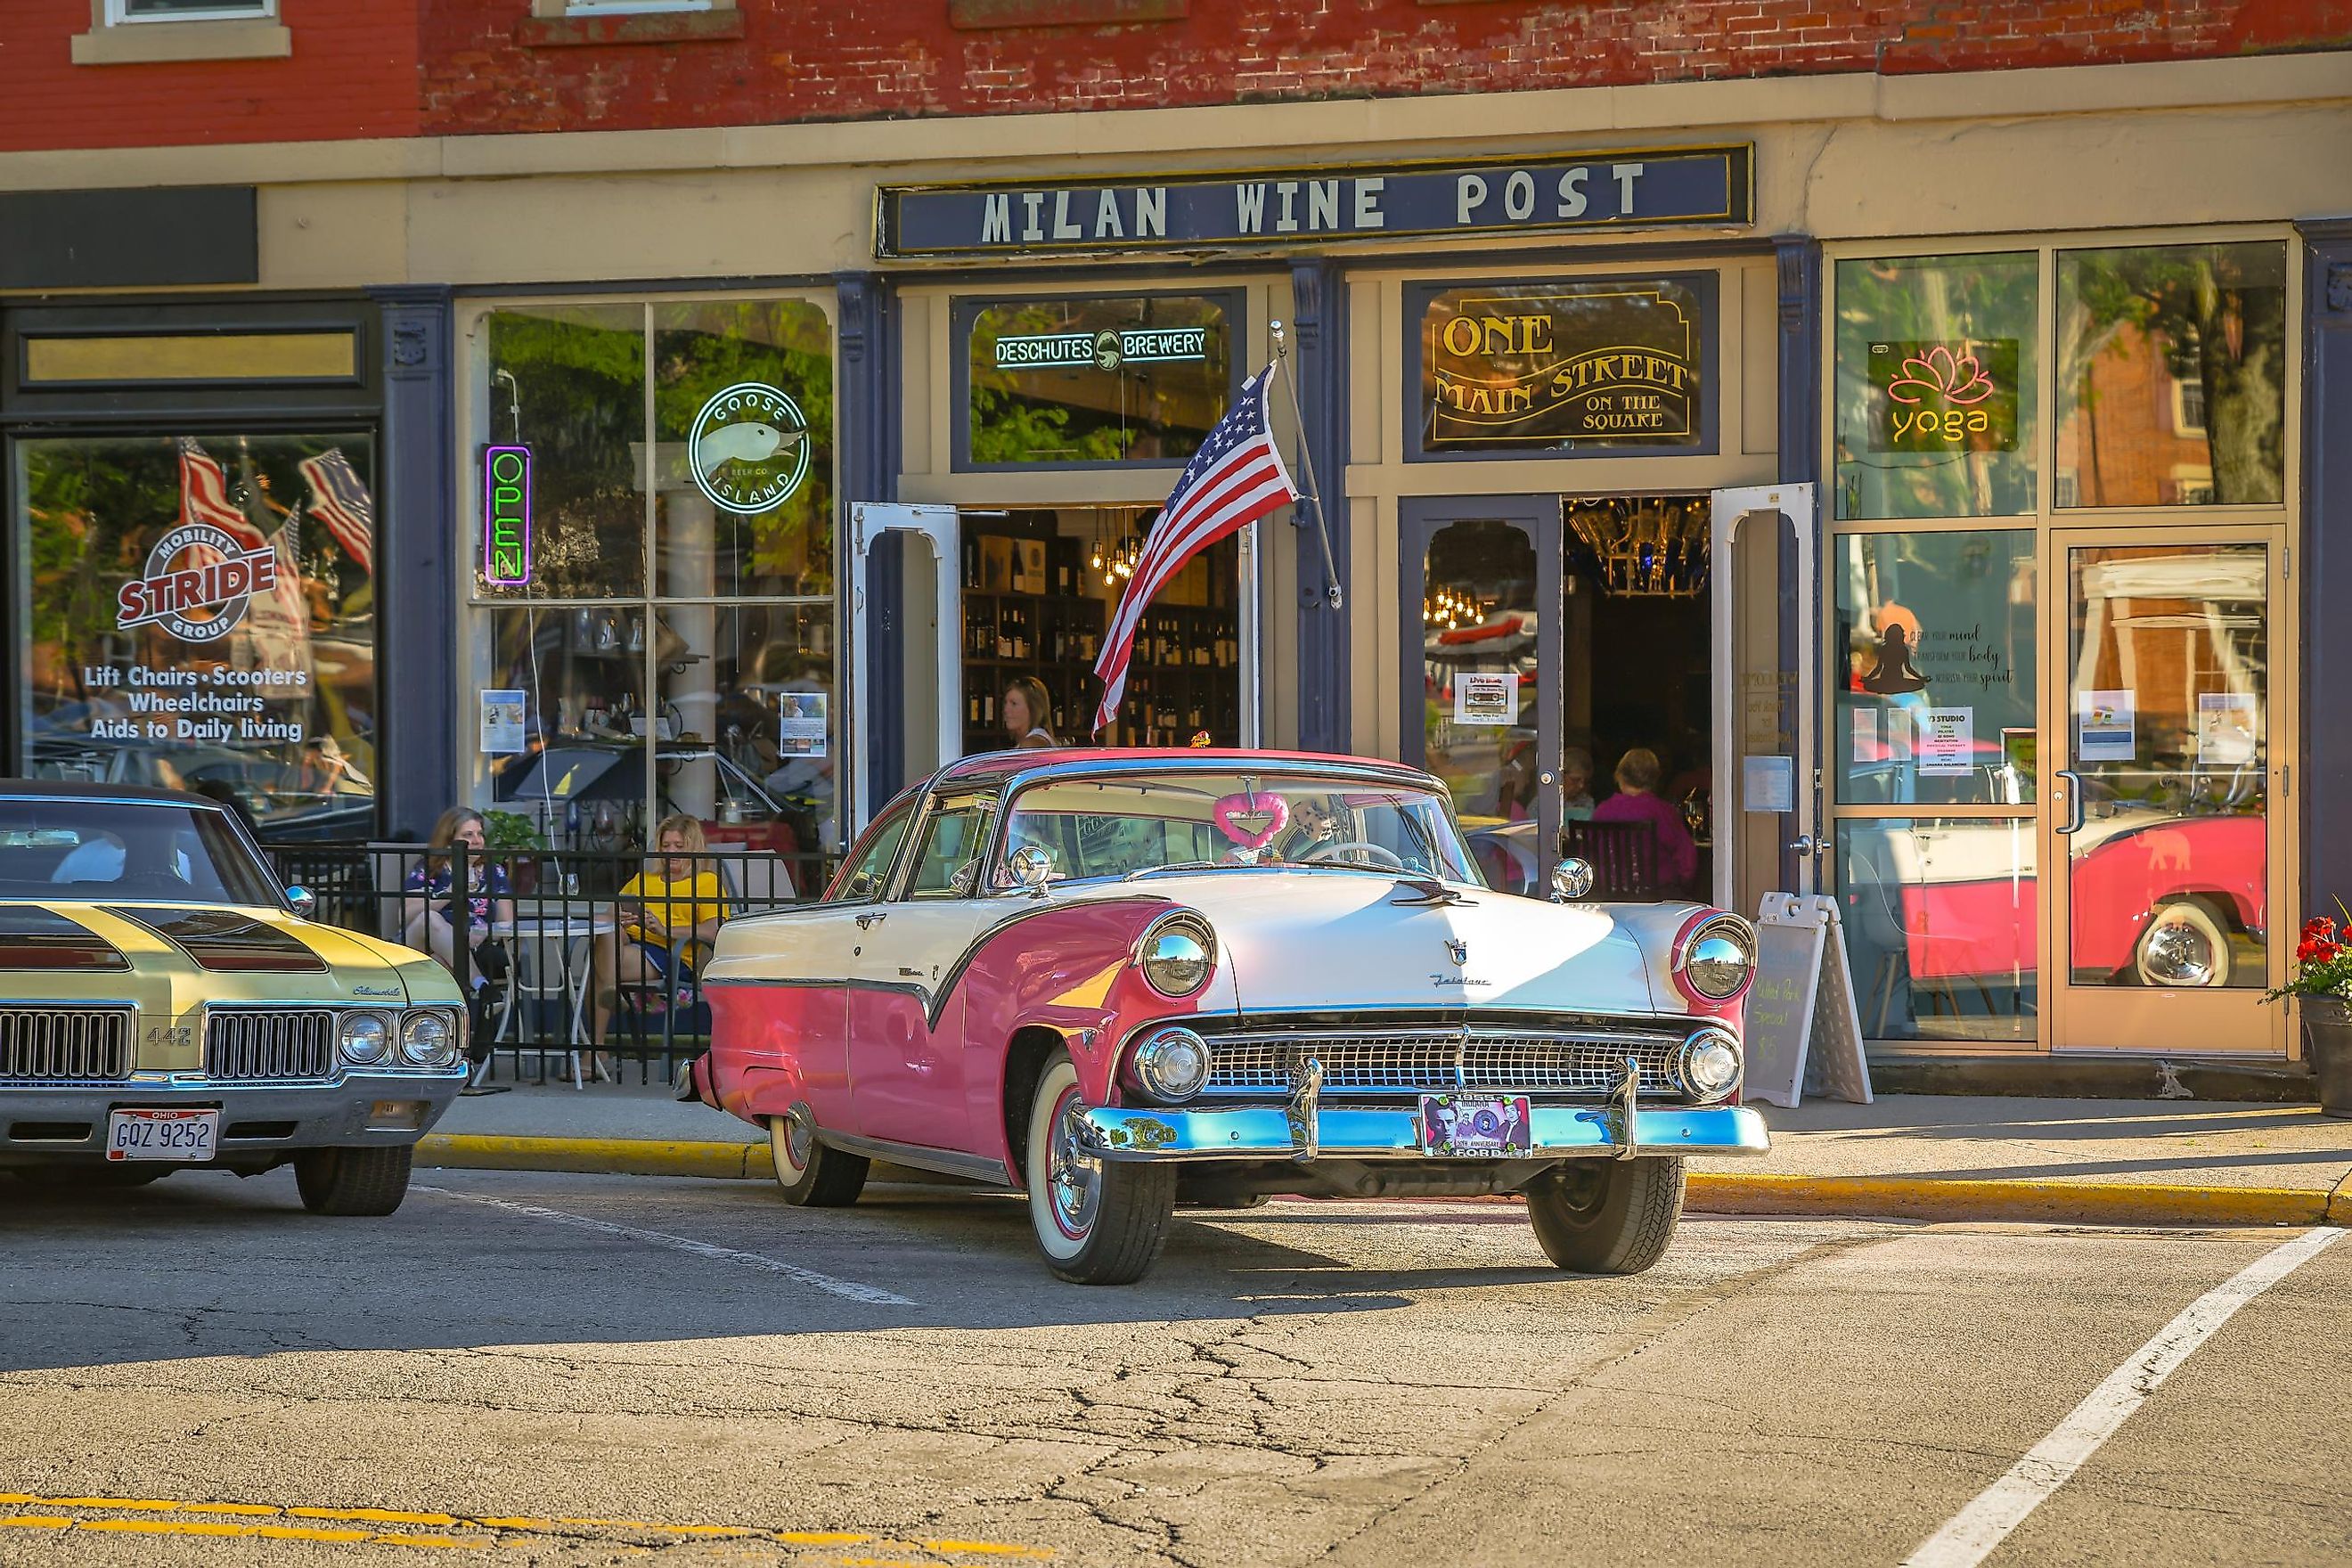 A beautiful pink Ford is parked in front of local shops in Milan, Ohio, via Keith J Finks / Shutterstock.com